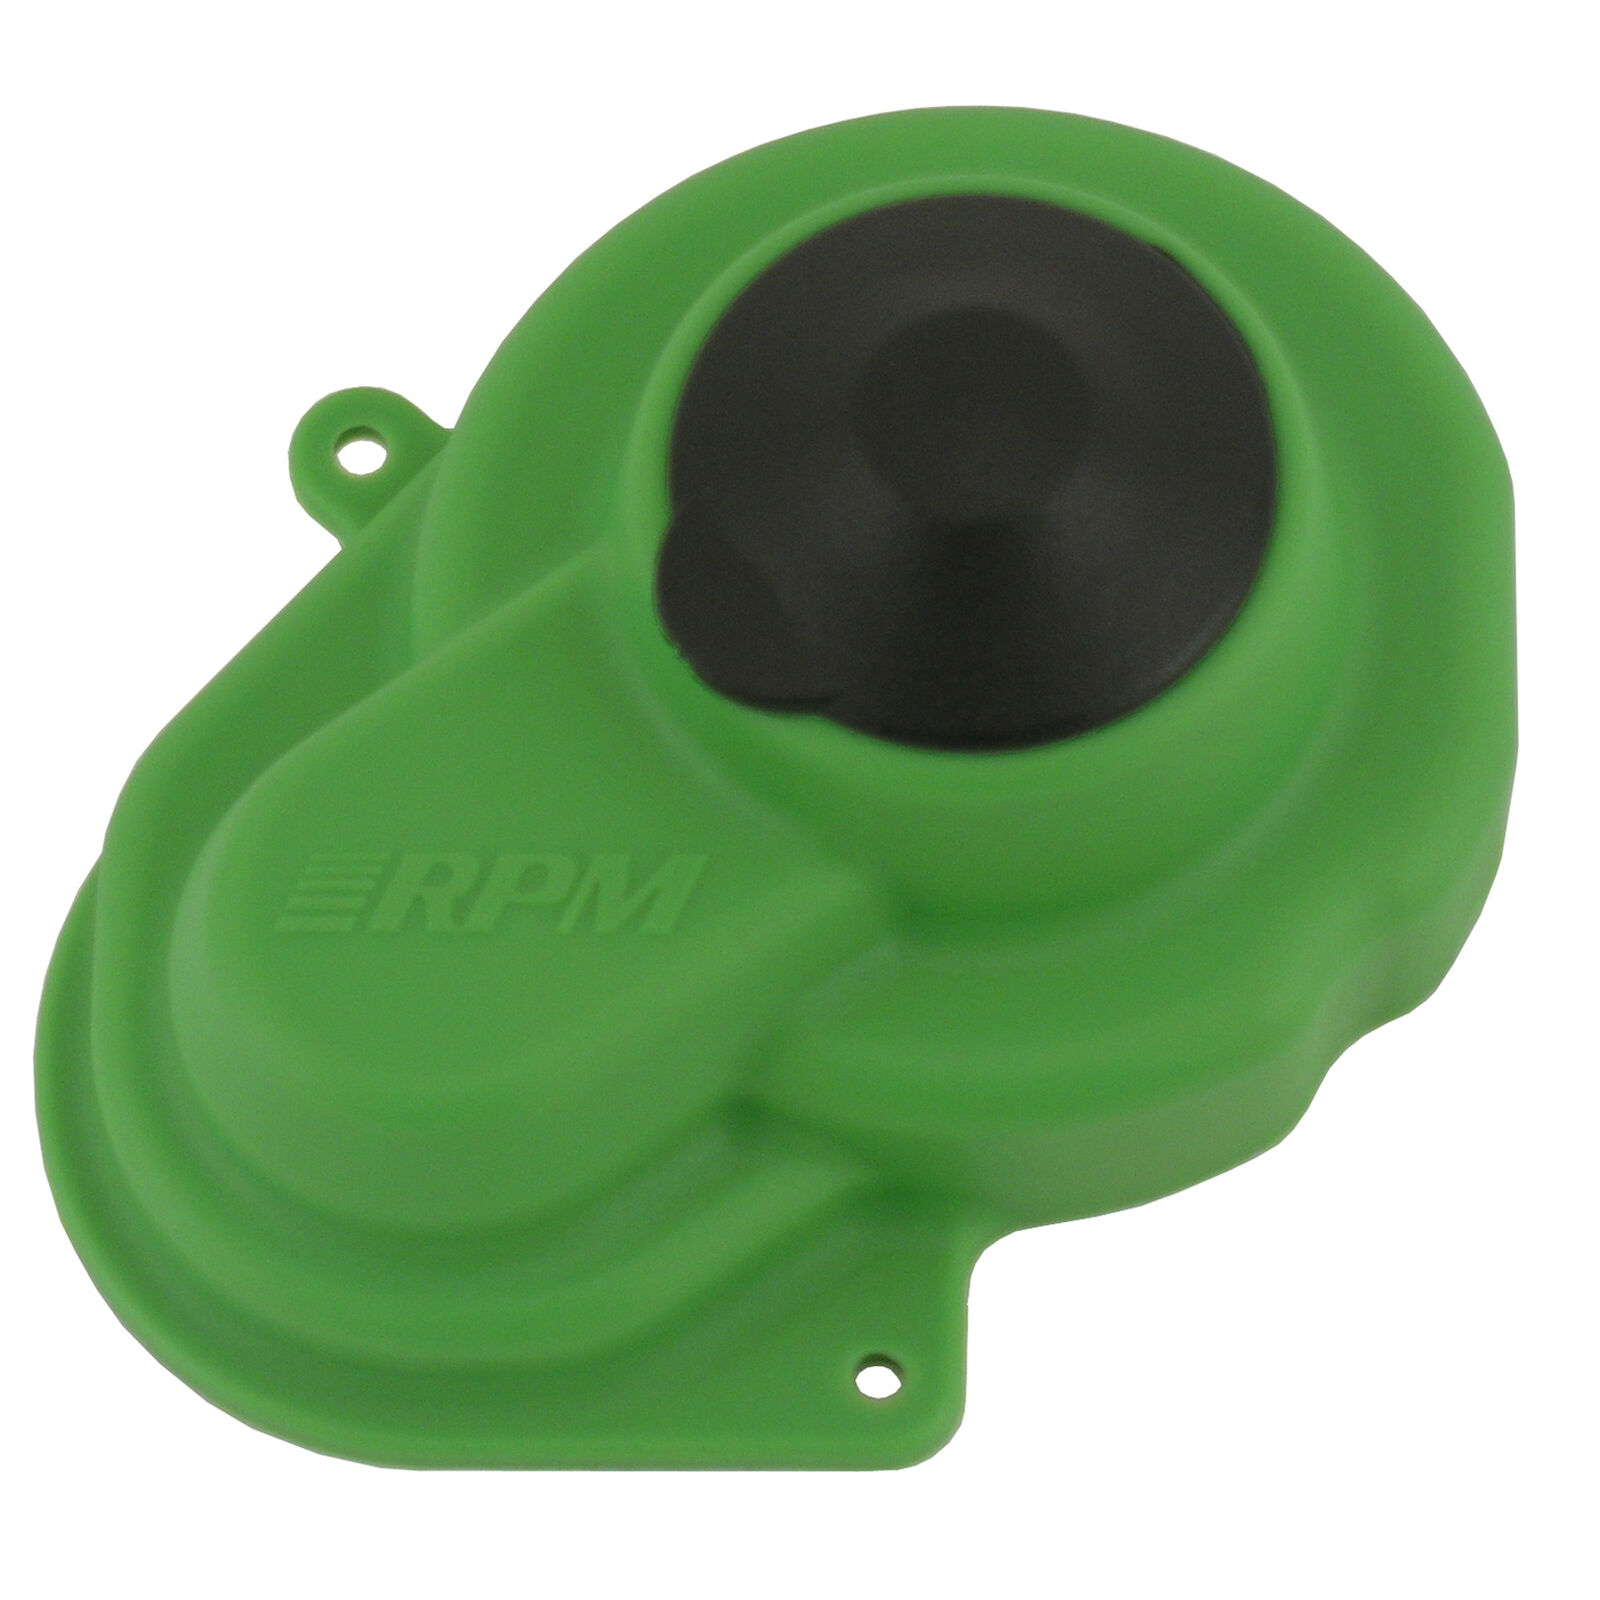 Sealed Gear Cover, Green: SLH 2WD.ST 2WD,Bandit,RU